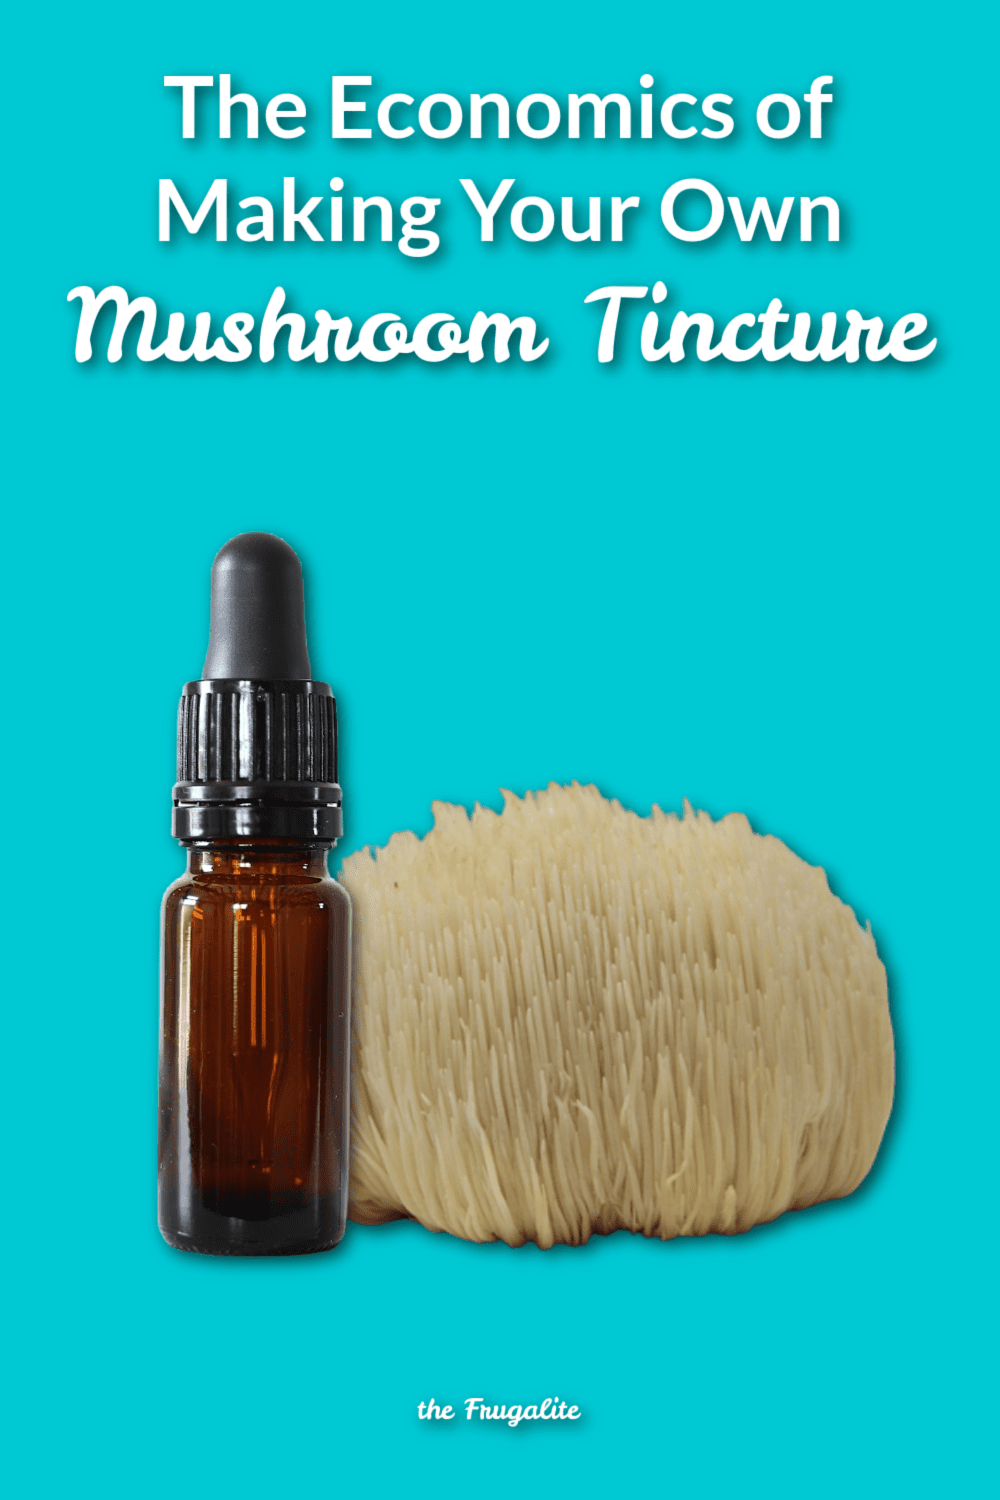 The Economics of Making Your Own Mushroom Tincture